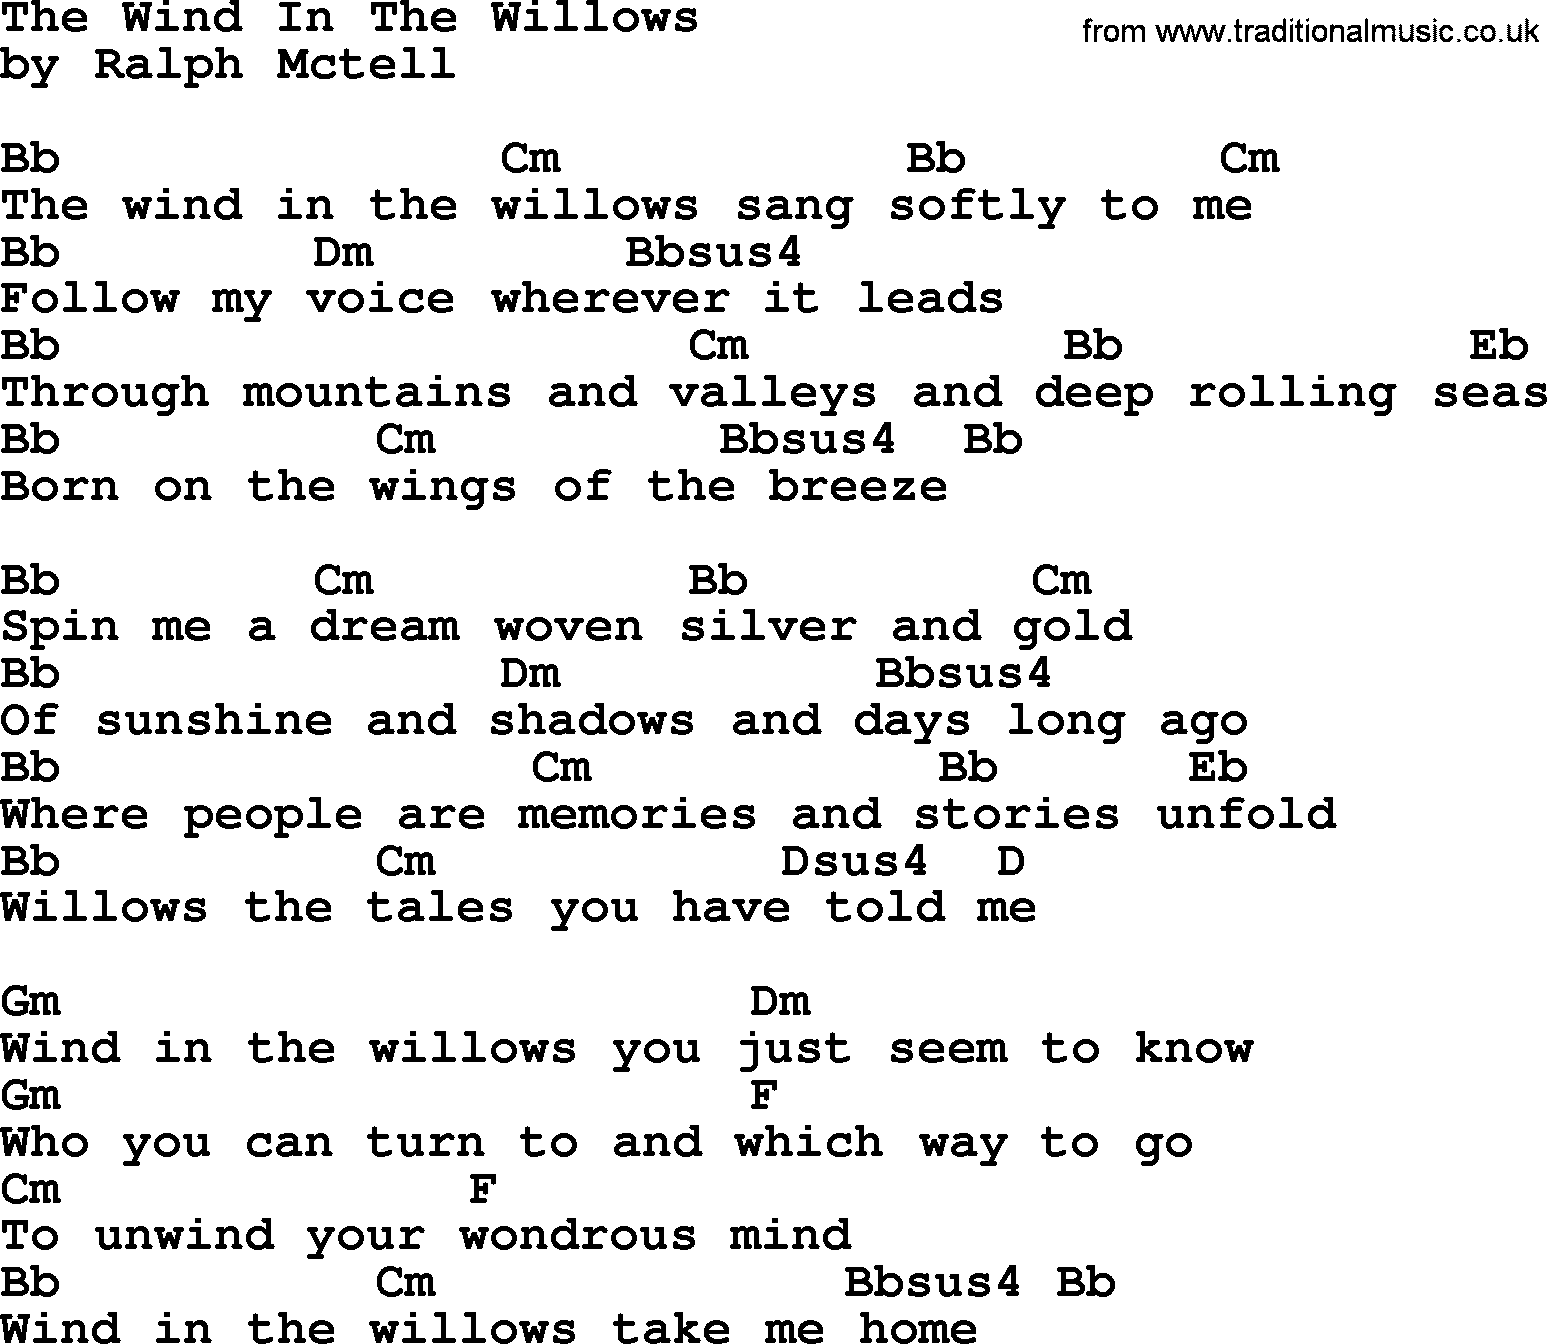 Ralph McTell Song: The Wind In The Willows, lyrics and chords